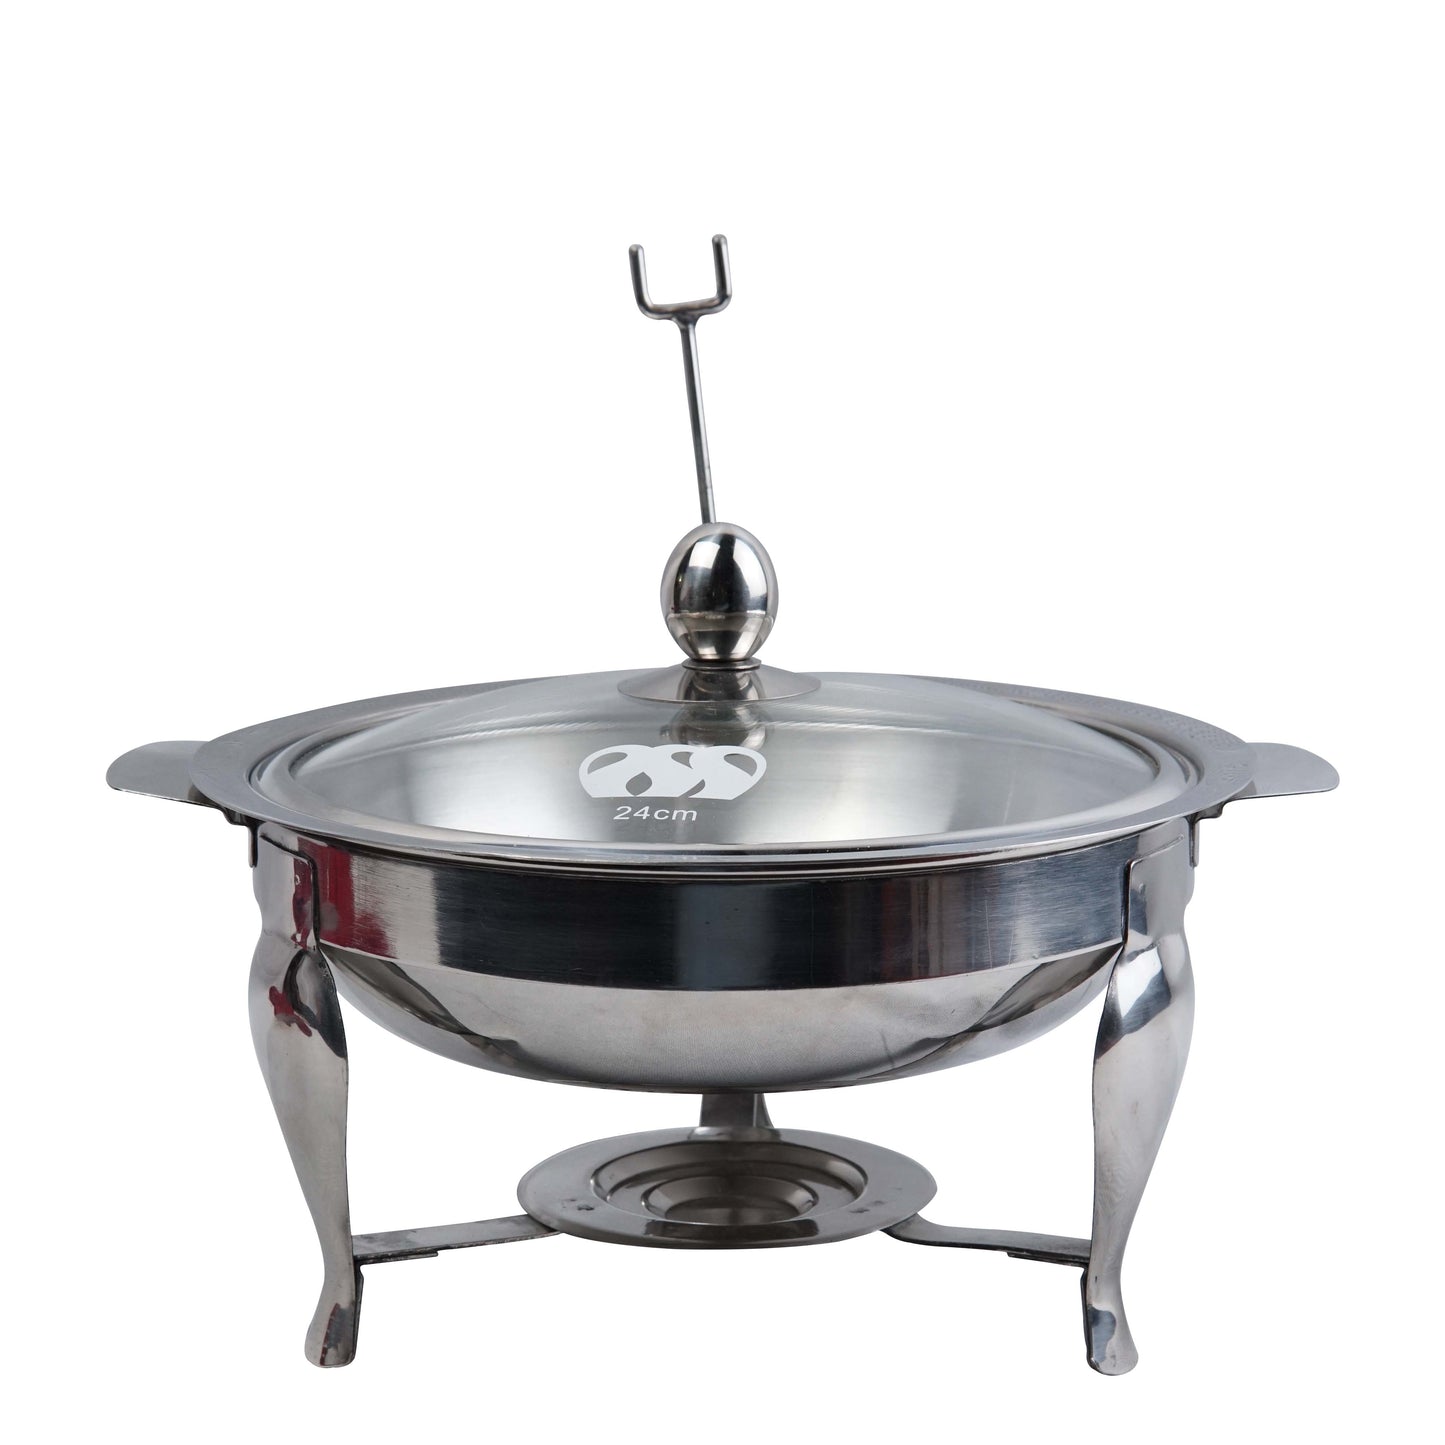 Stainless steel Chafing Dish, Food Warming Buffet Serving Pot Design 01 (24cm) with Tealight Candle